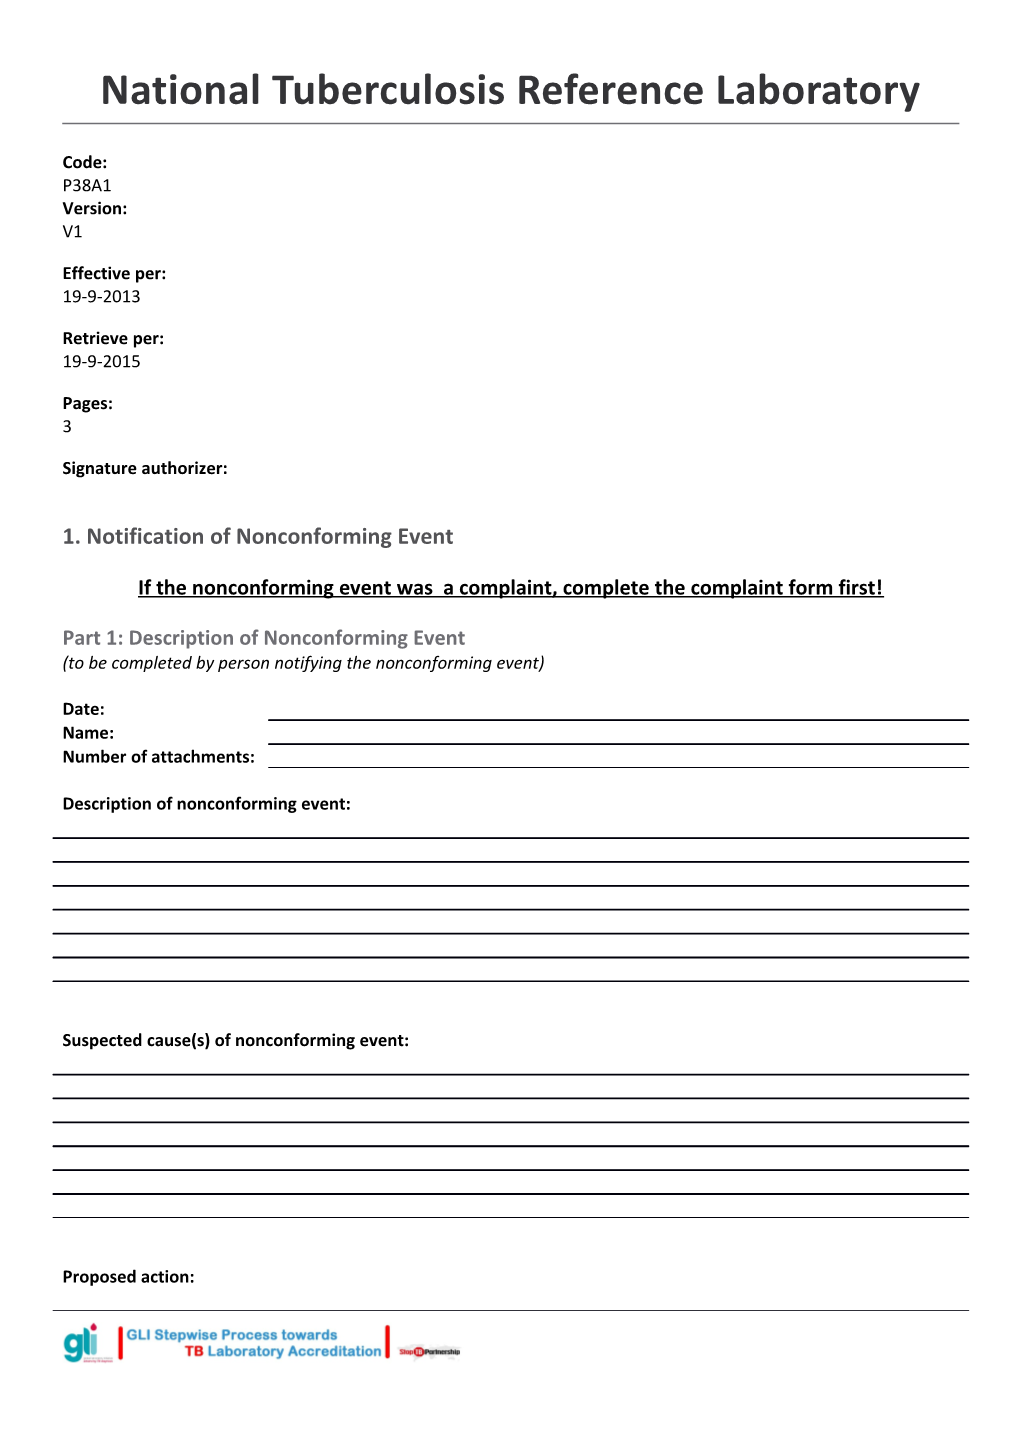 If the Nonconforming Event Was a Complaint, Complete the Complaint Form First!